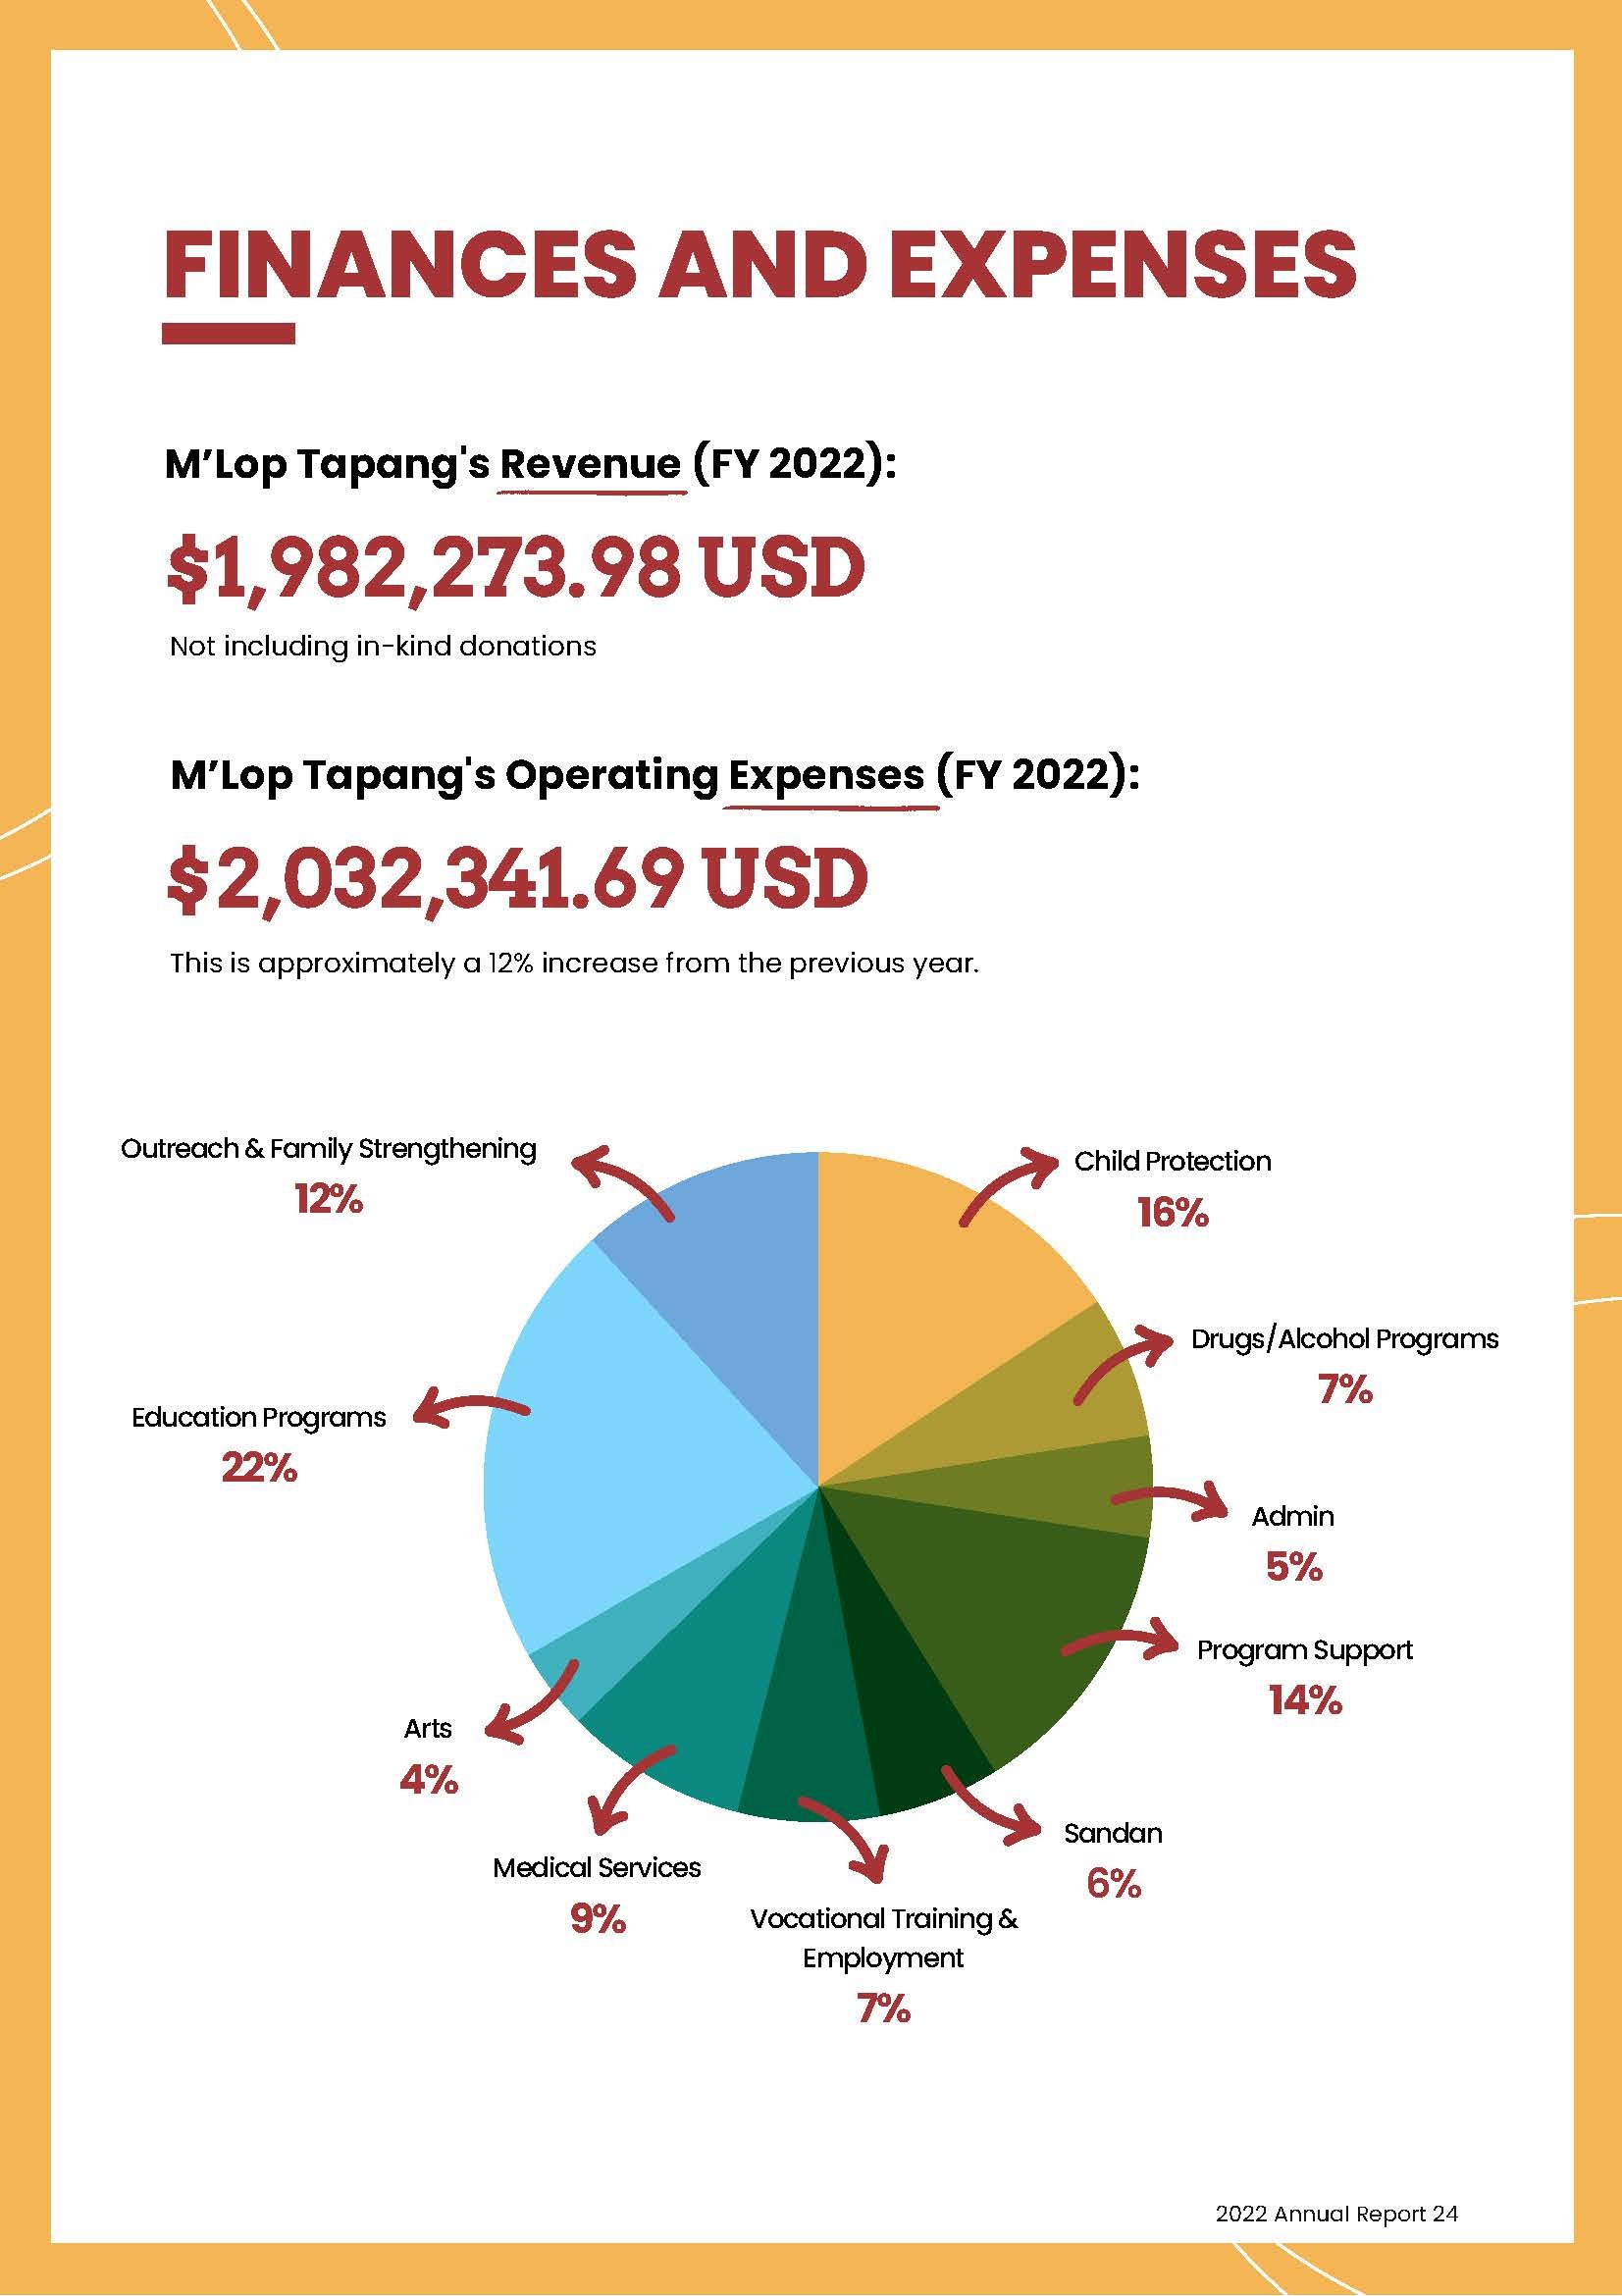 M'Lop Tapang 2022 Annual Report_Page_24.jpg